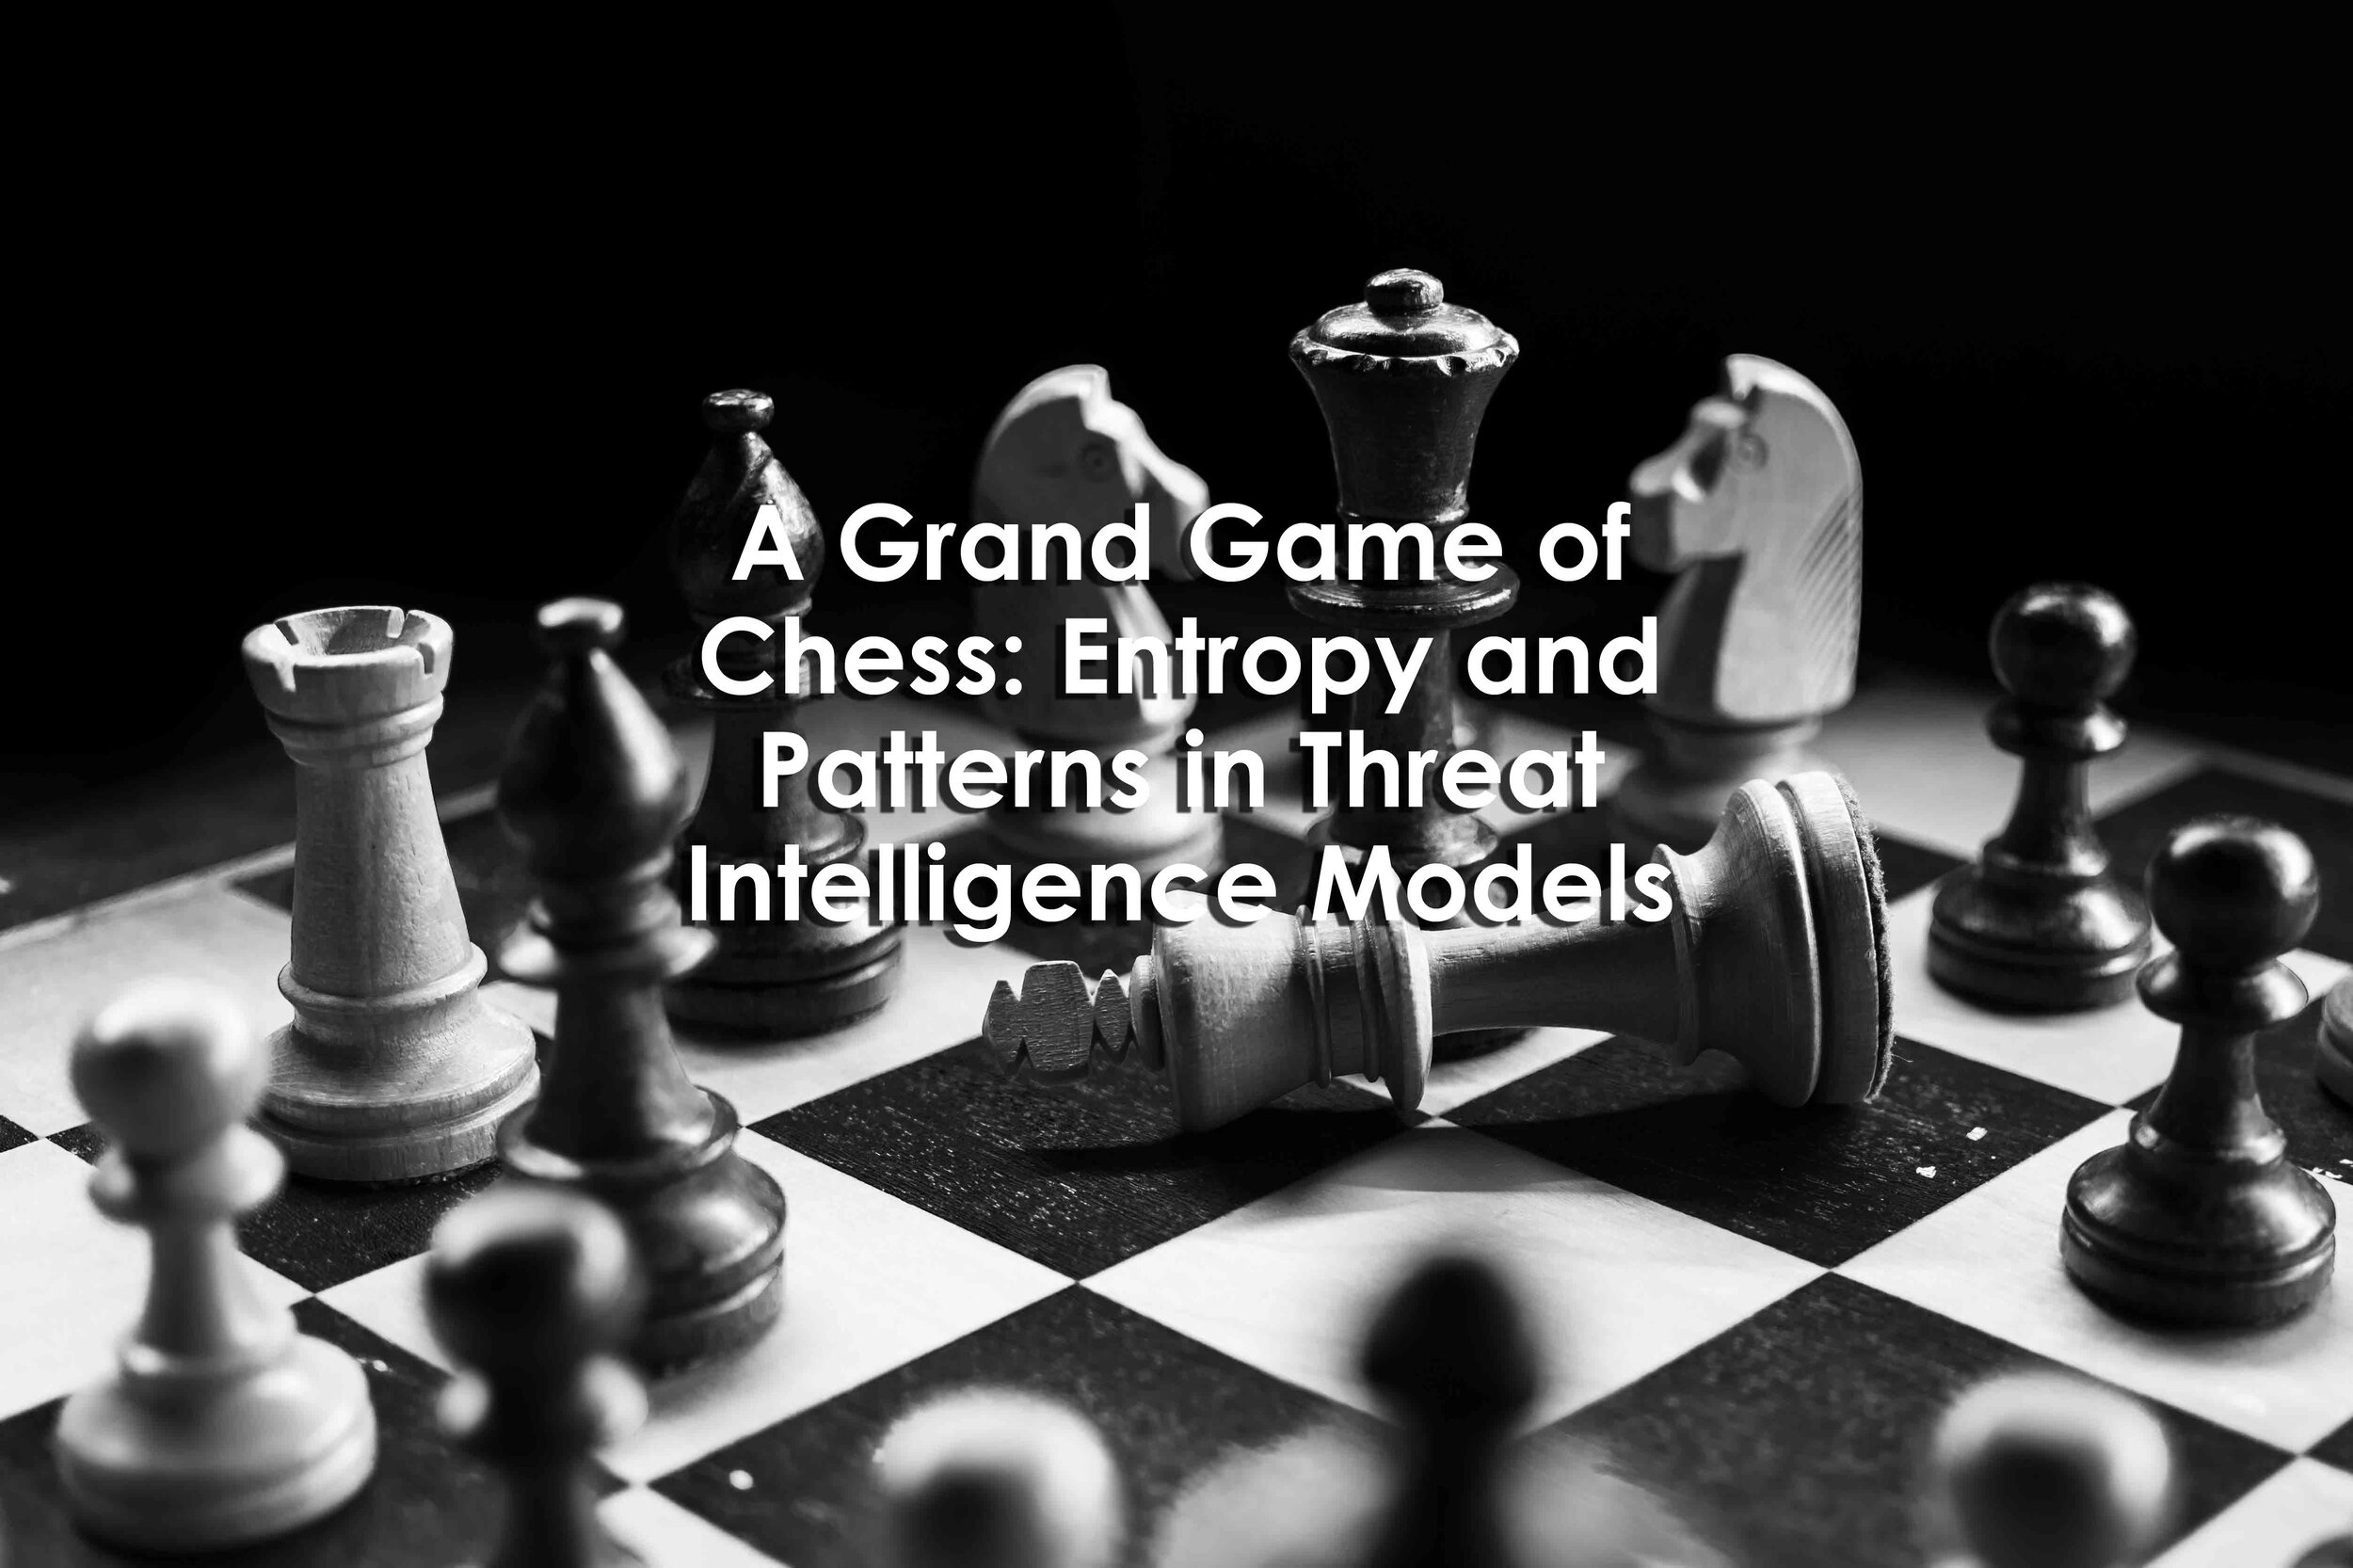 A Grand Game of Chess: Entropy and Patterns in Threat Intelligence Models